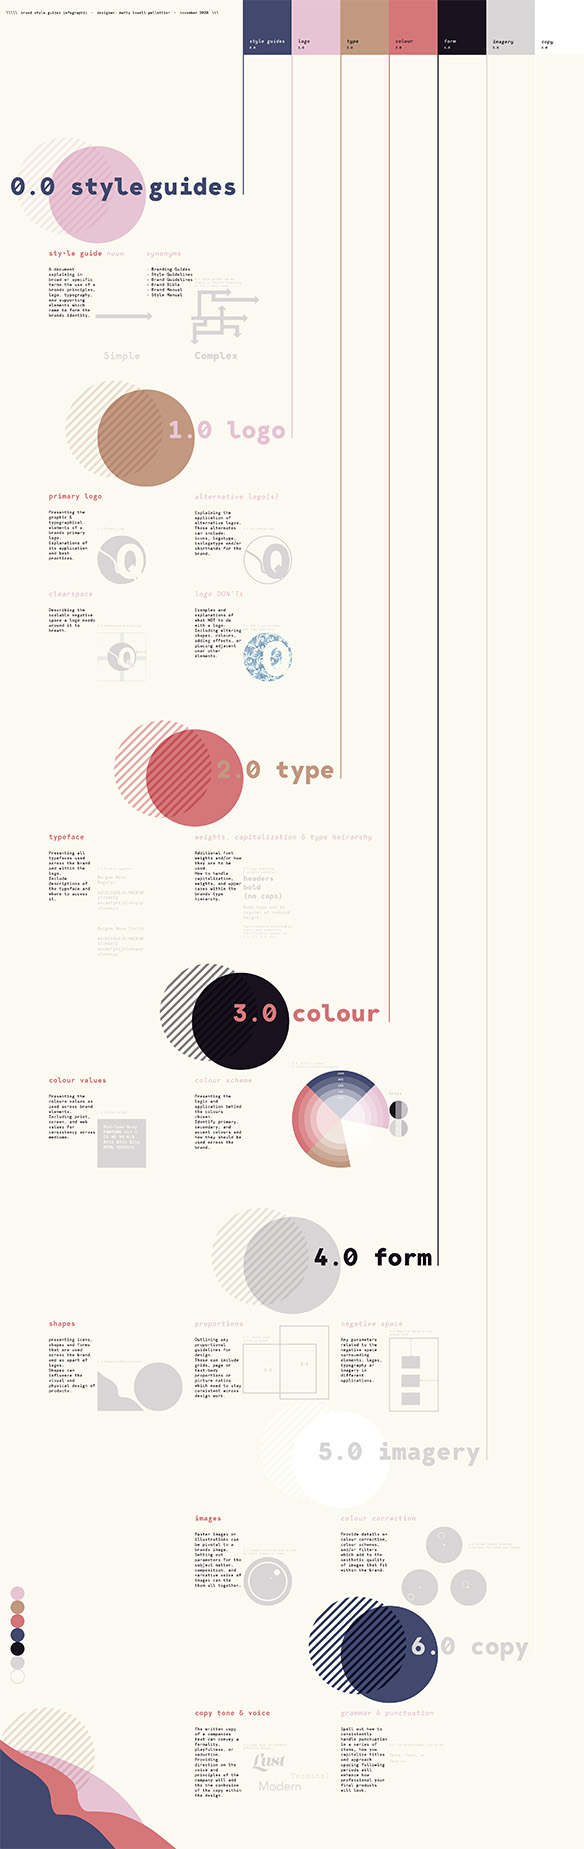 Style Guide Infographic